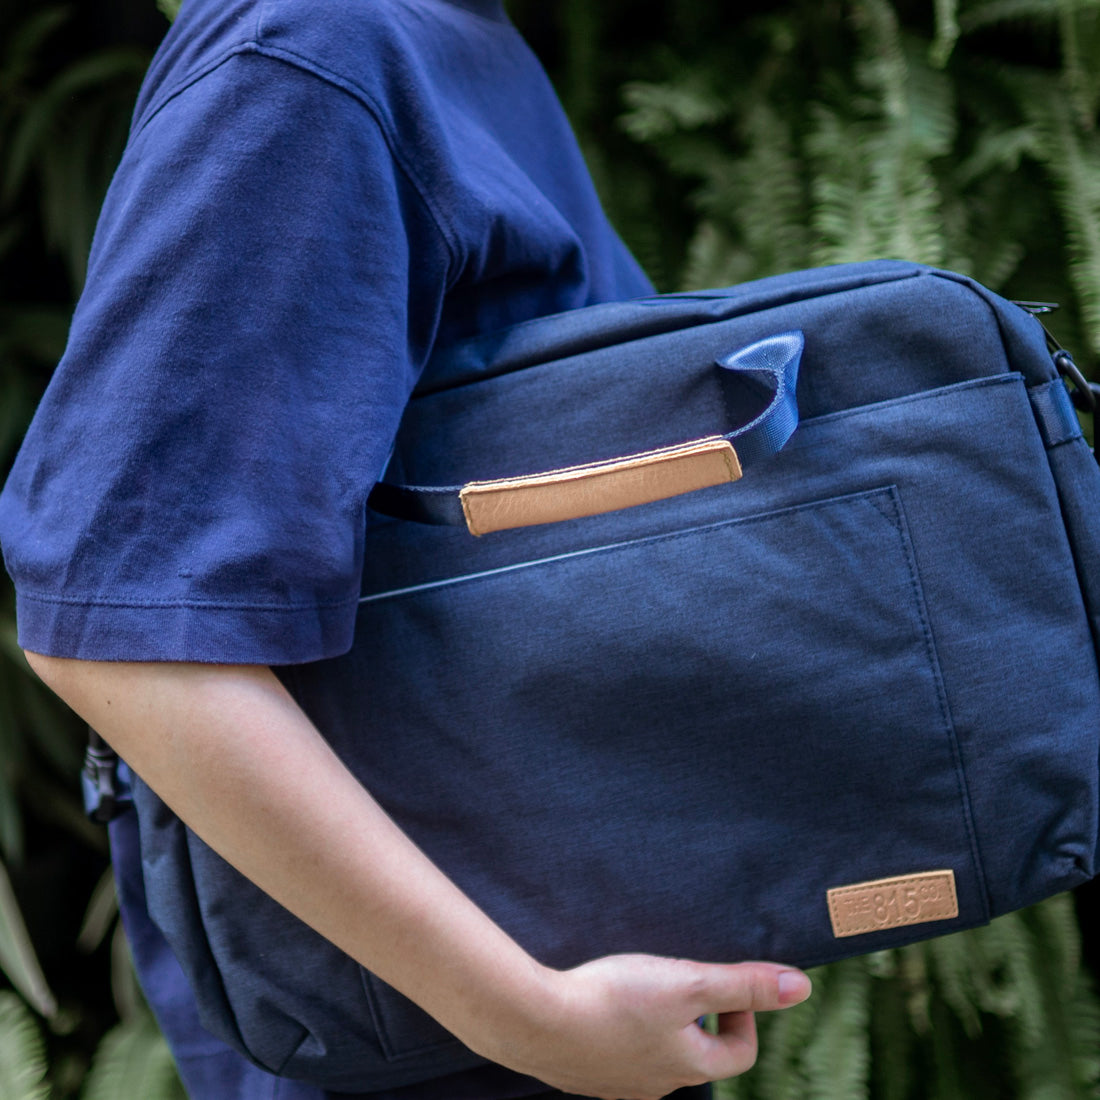 The Cyrus Laptop Bag 14" in Navy Blue